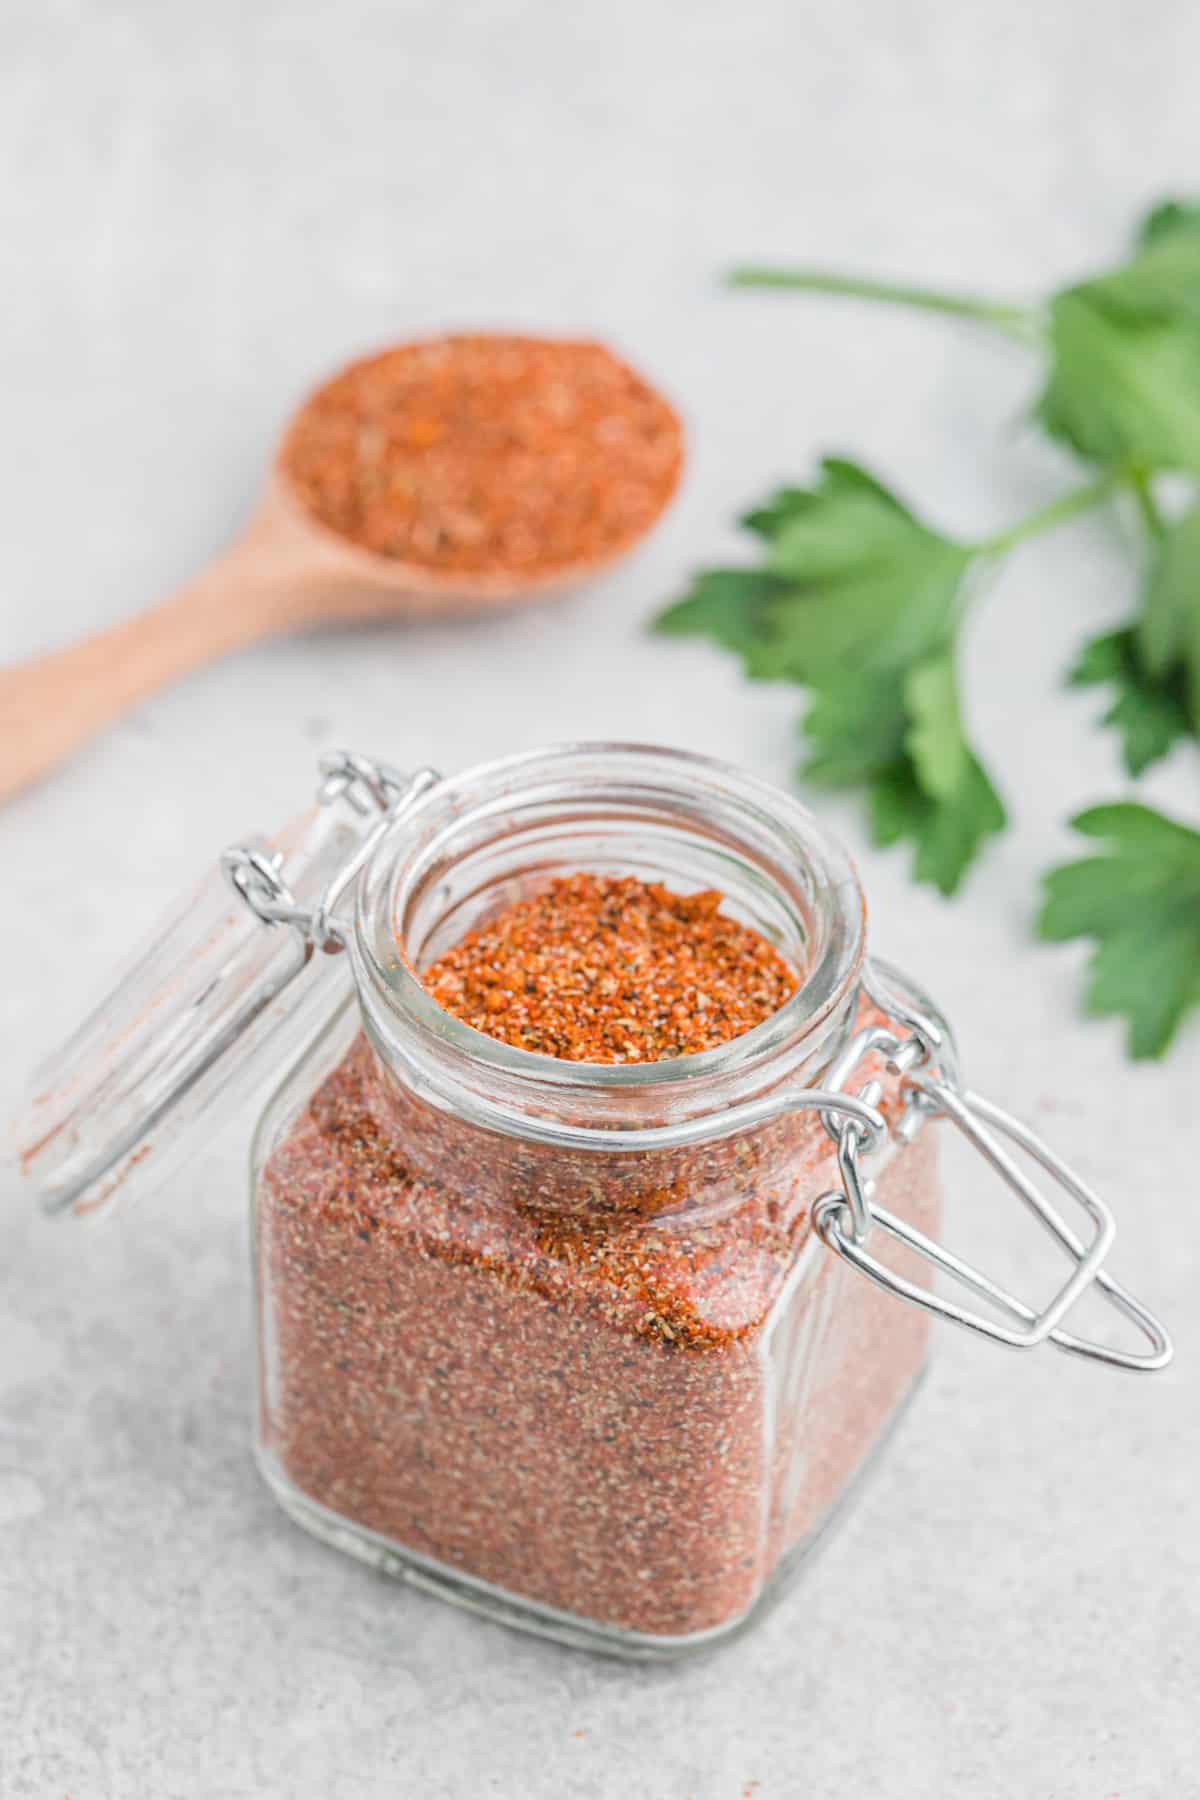 Homemade turkey rub seasoning in a small jar with a full wooden spoon on the table.